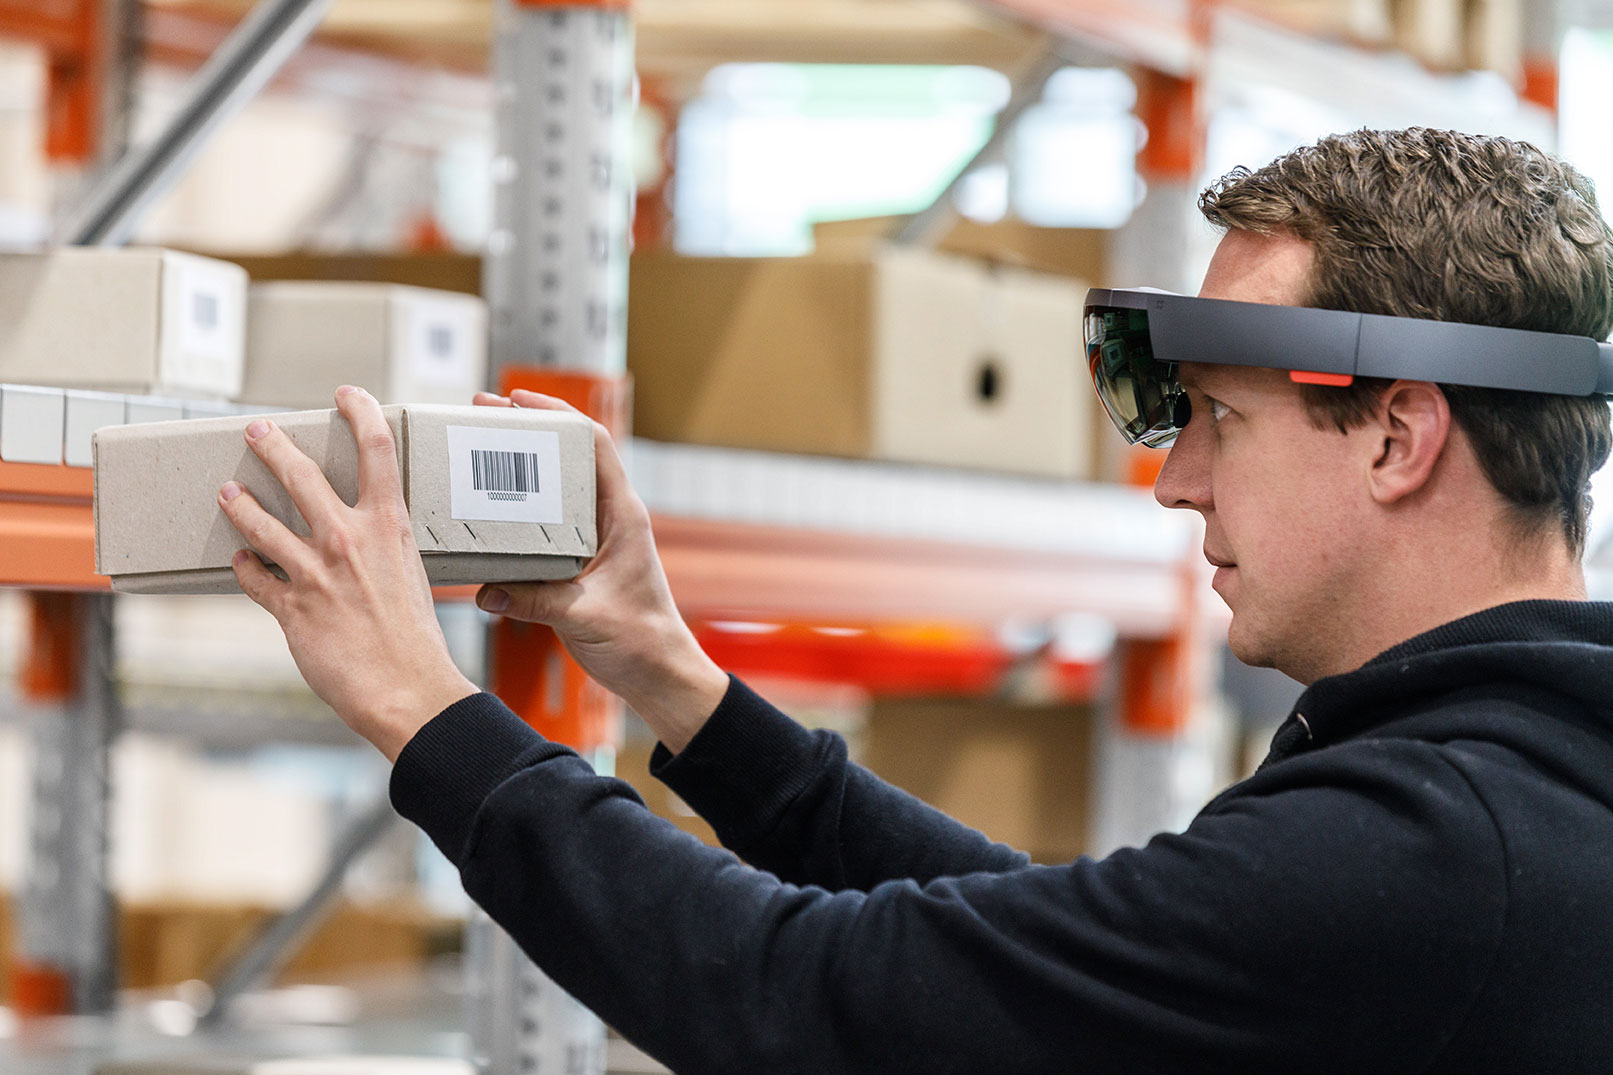 Augmented Reality assists packaging process in logistics.